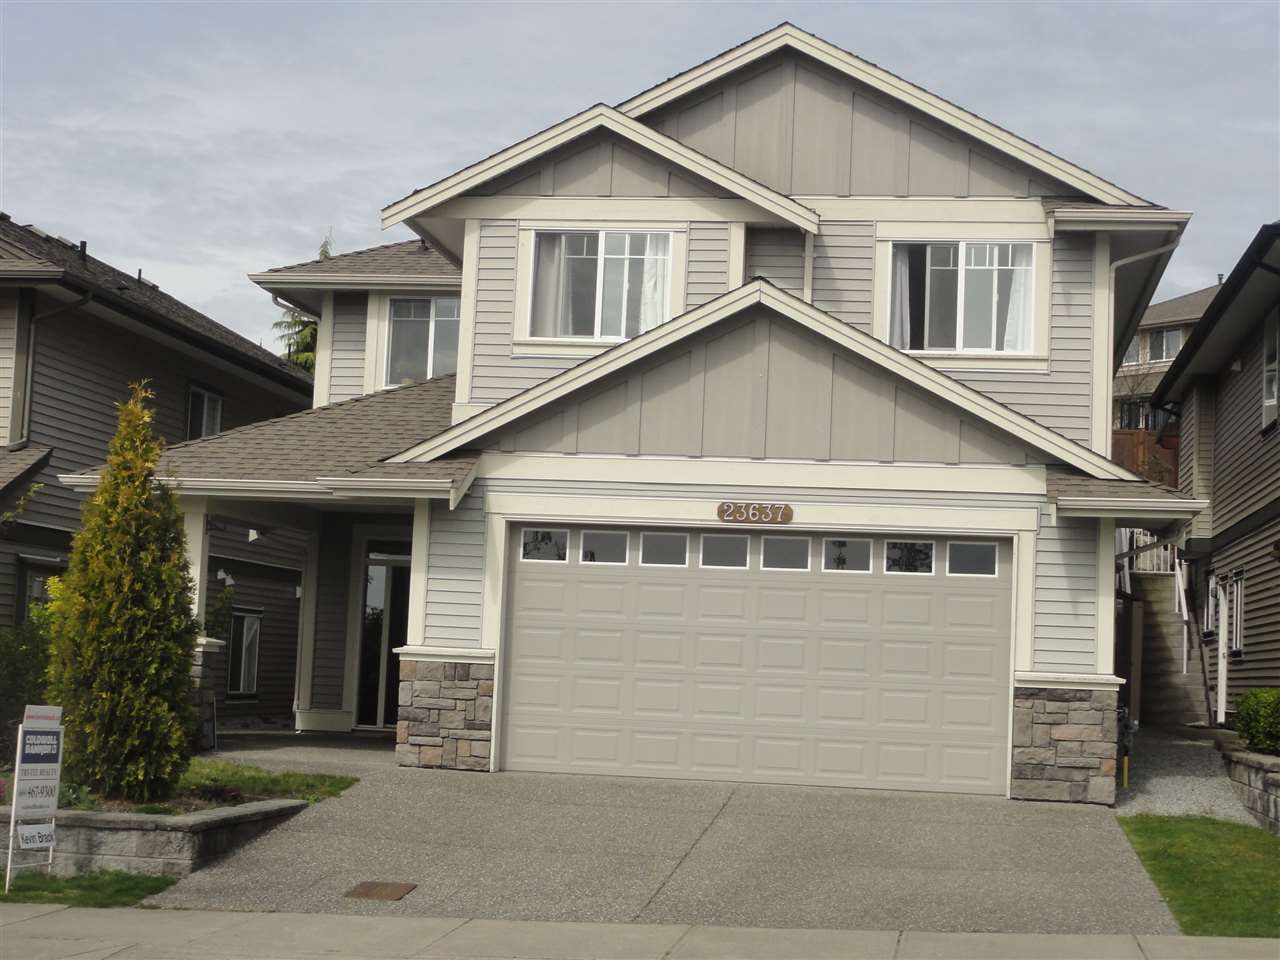 Main Photo: 23637 133 AVENUE in Maple Ridge: Silver Valley House for sale : MLS®# R2053343